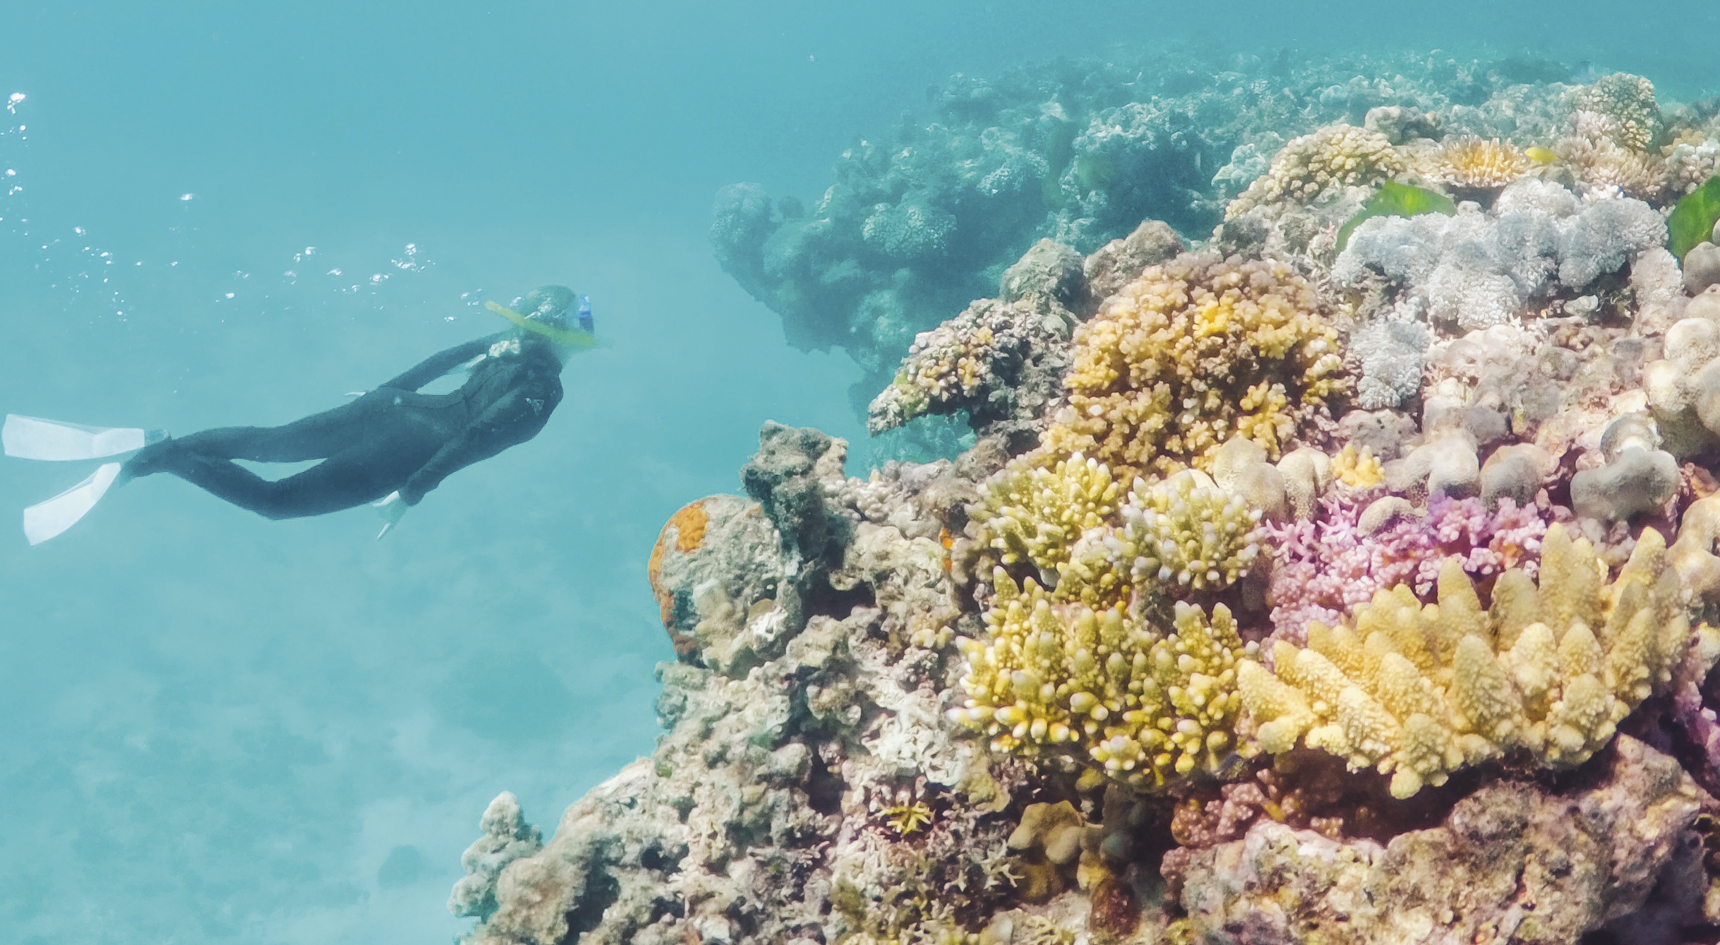 Coral on the Great Barrier Reef with a diver in the background.